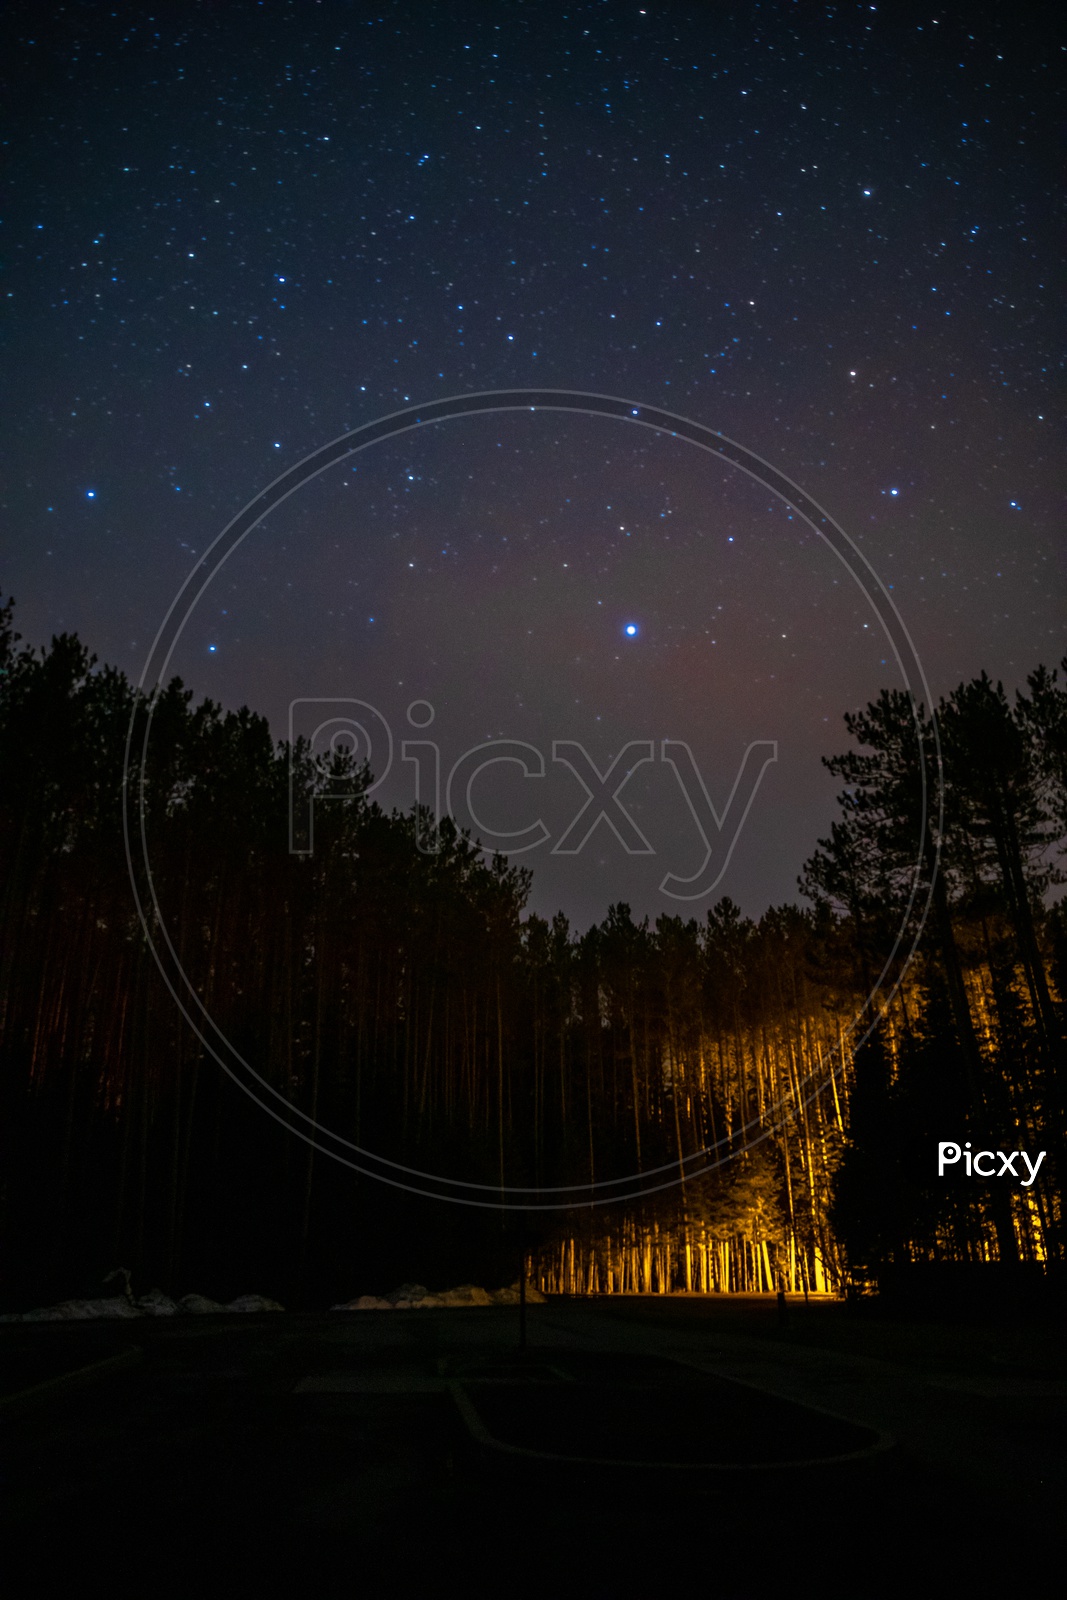 Starry sky and milky way with trees on the foreground